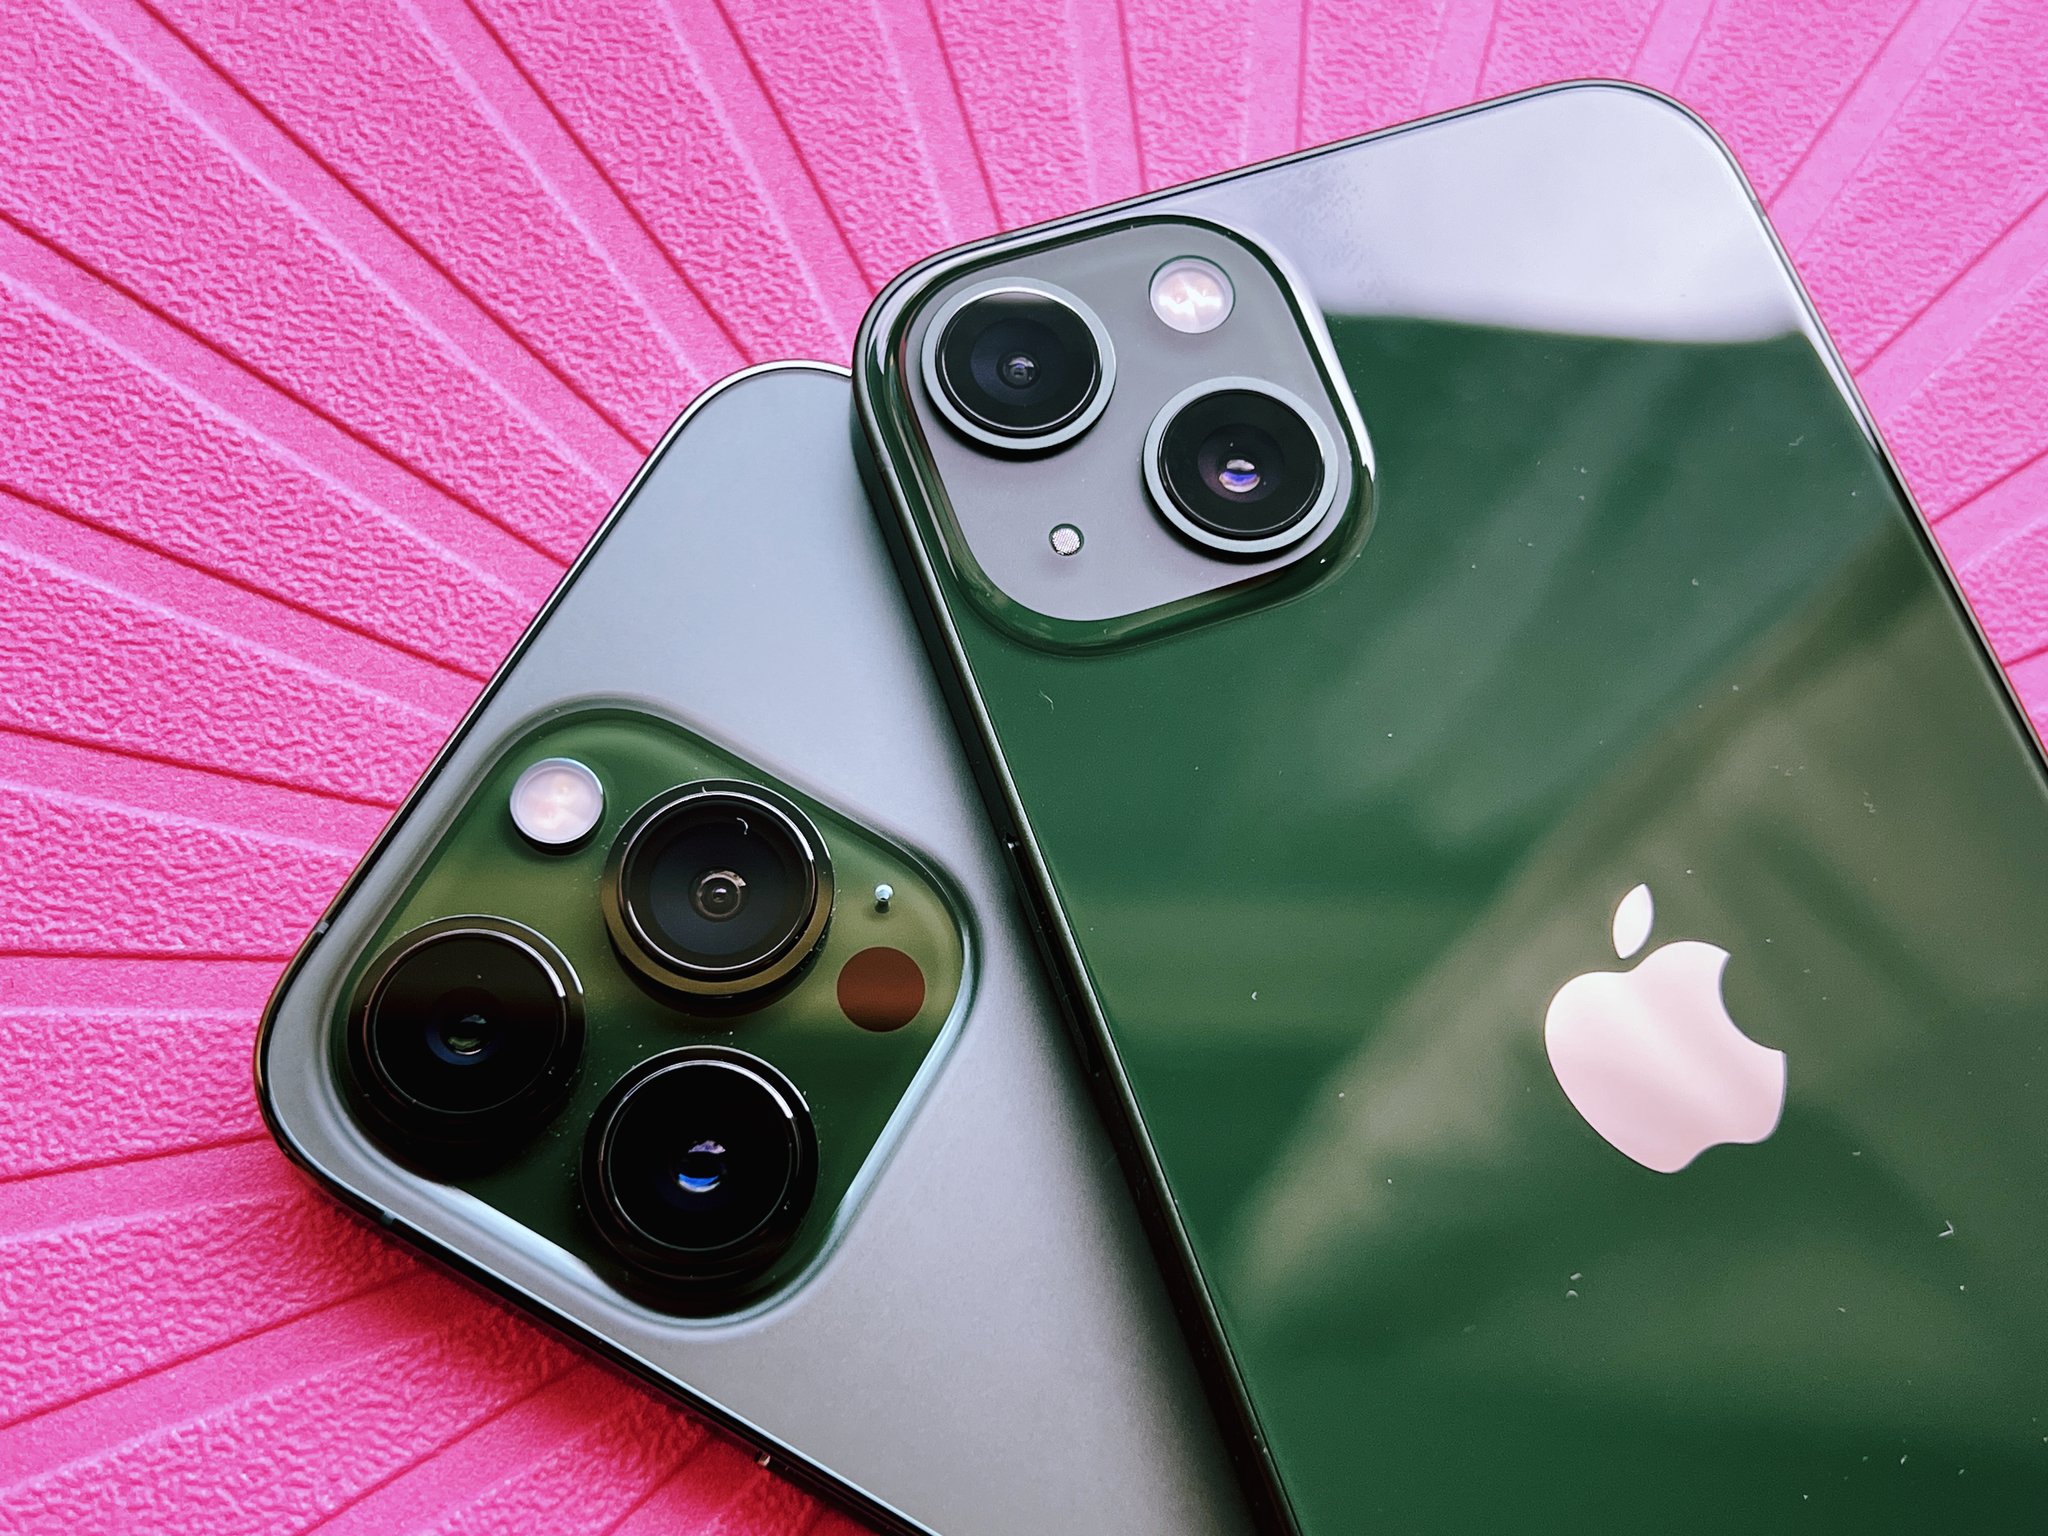 iPhone 13 Pro Max, iPhone 13 Pro in New Alpine Green, and iPhone 13, iPhone  13 mini in Green Colour Launched